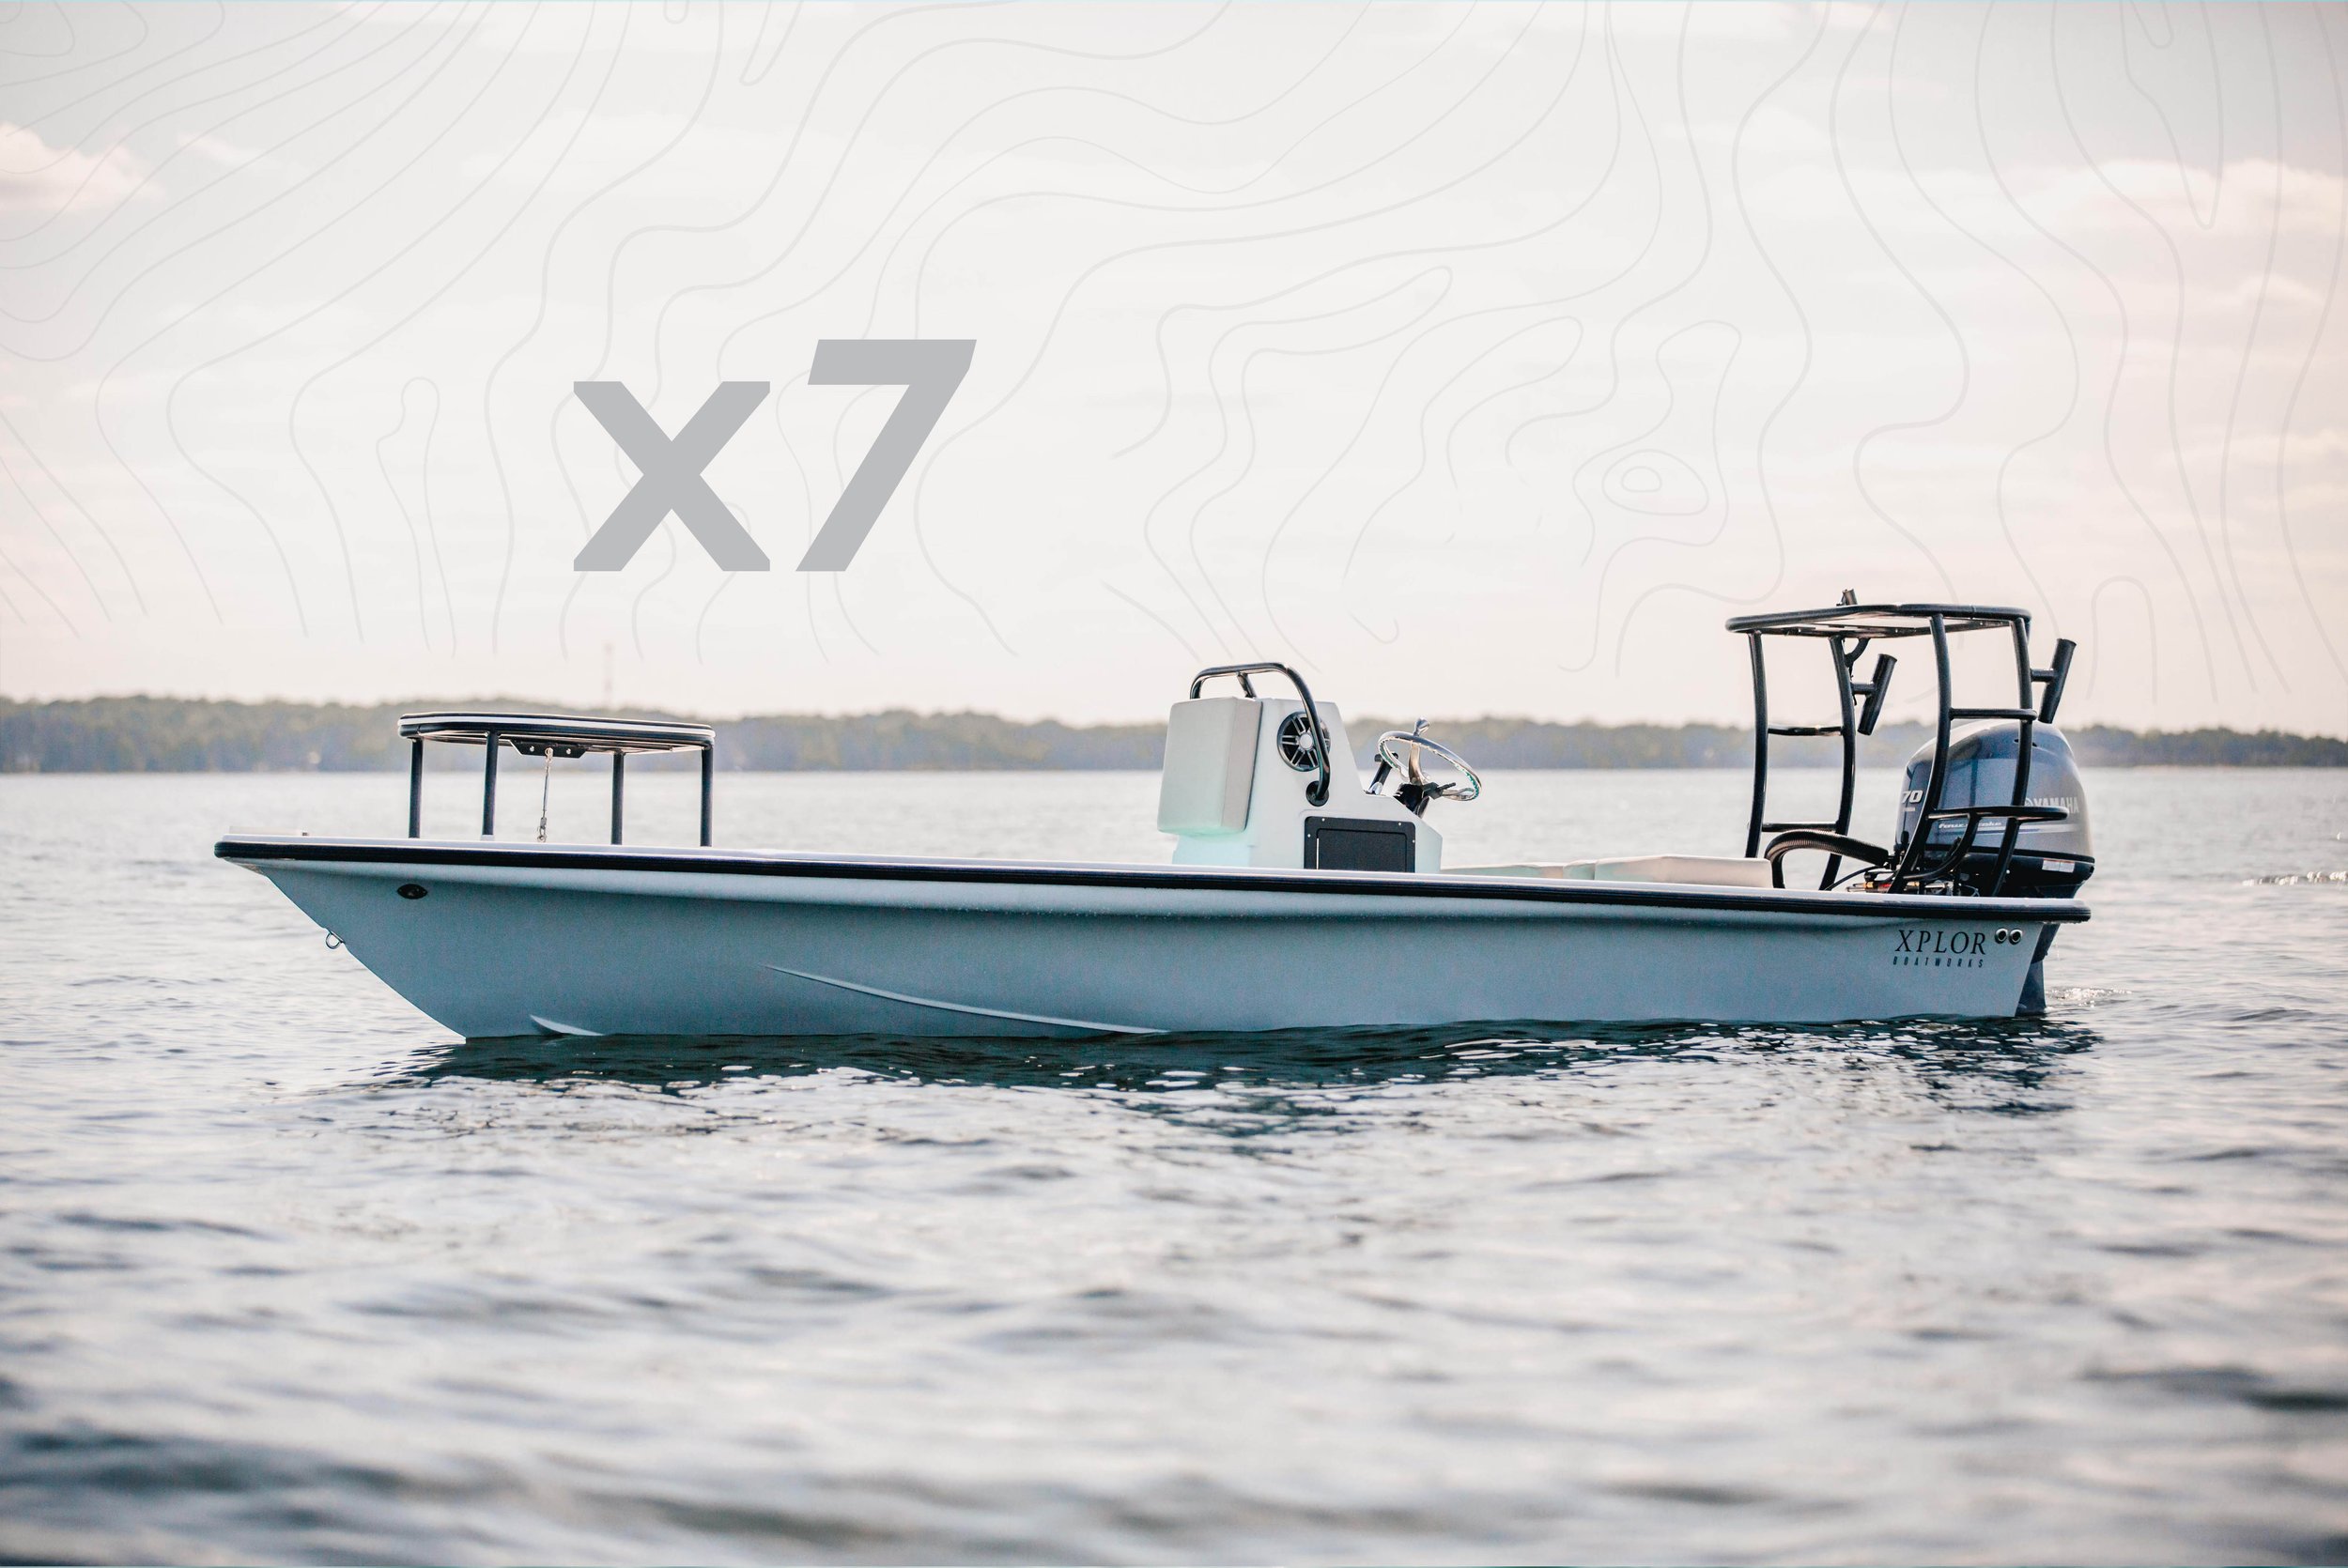 What if we built an @xplorboatworks X7 as our next giveaway boat?? Ma